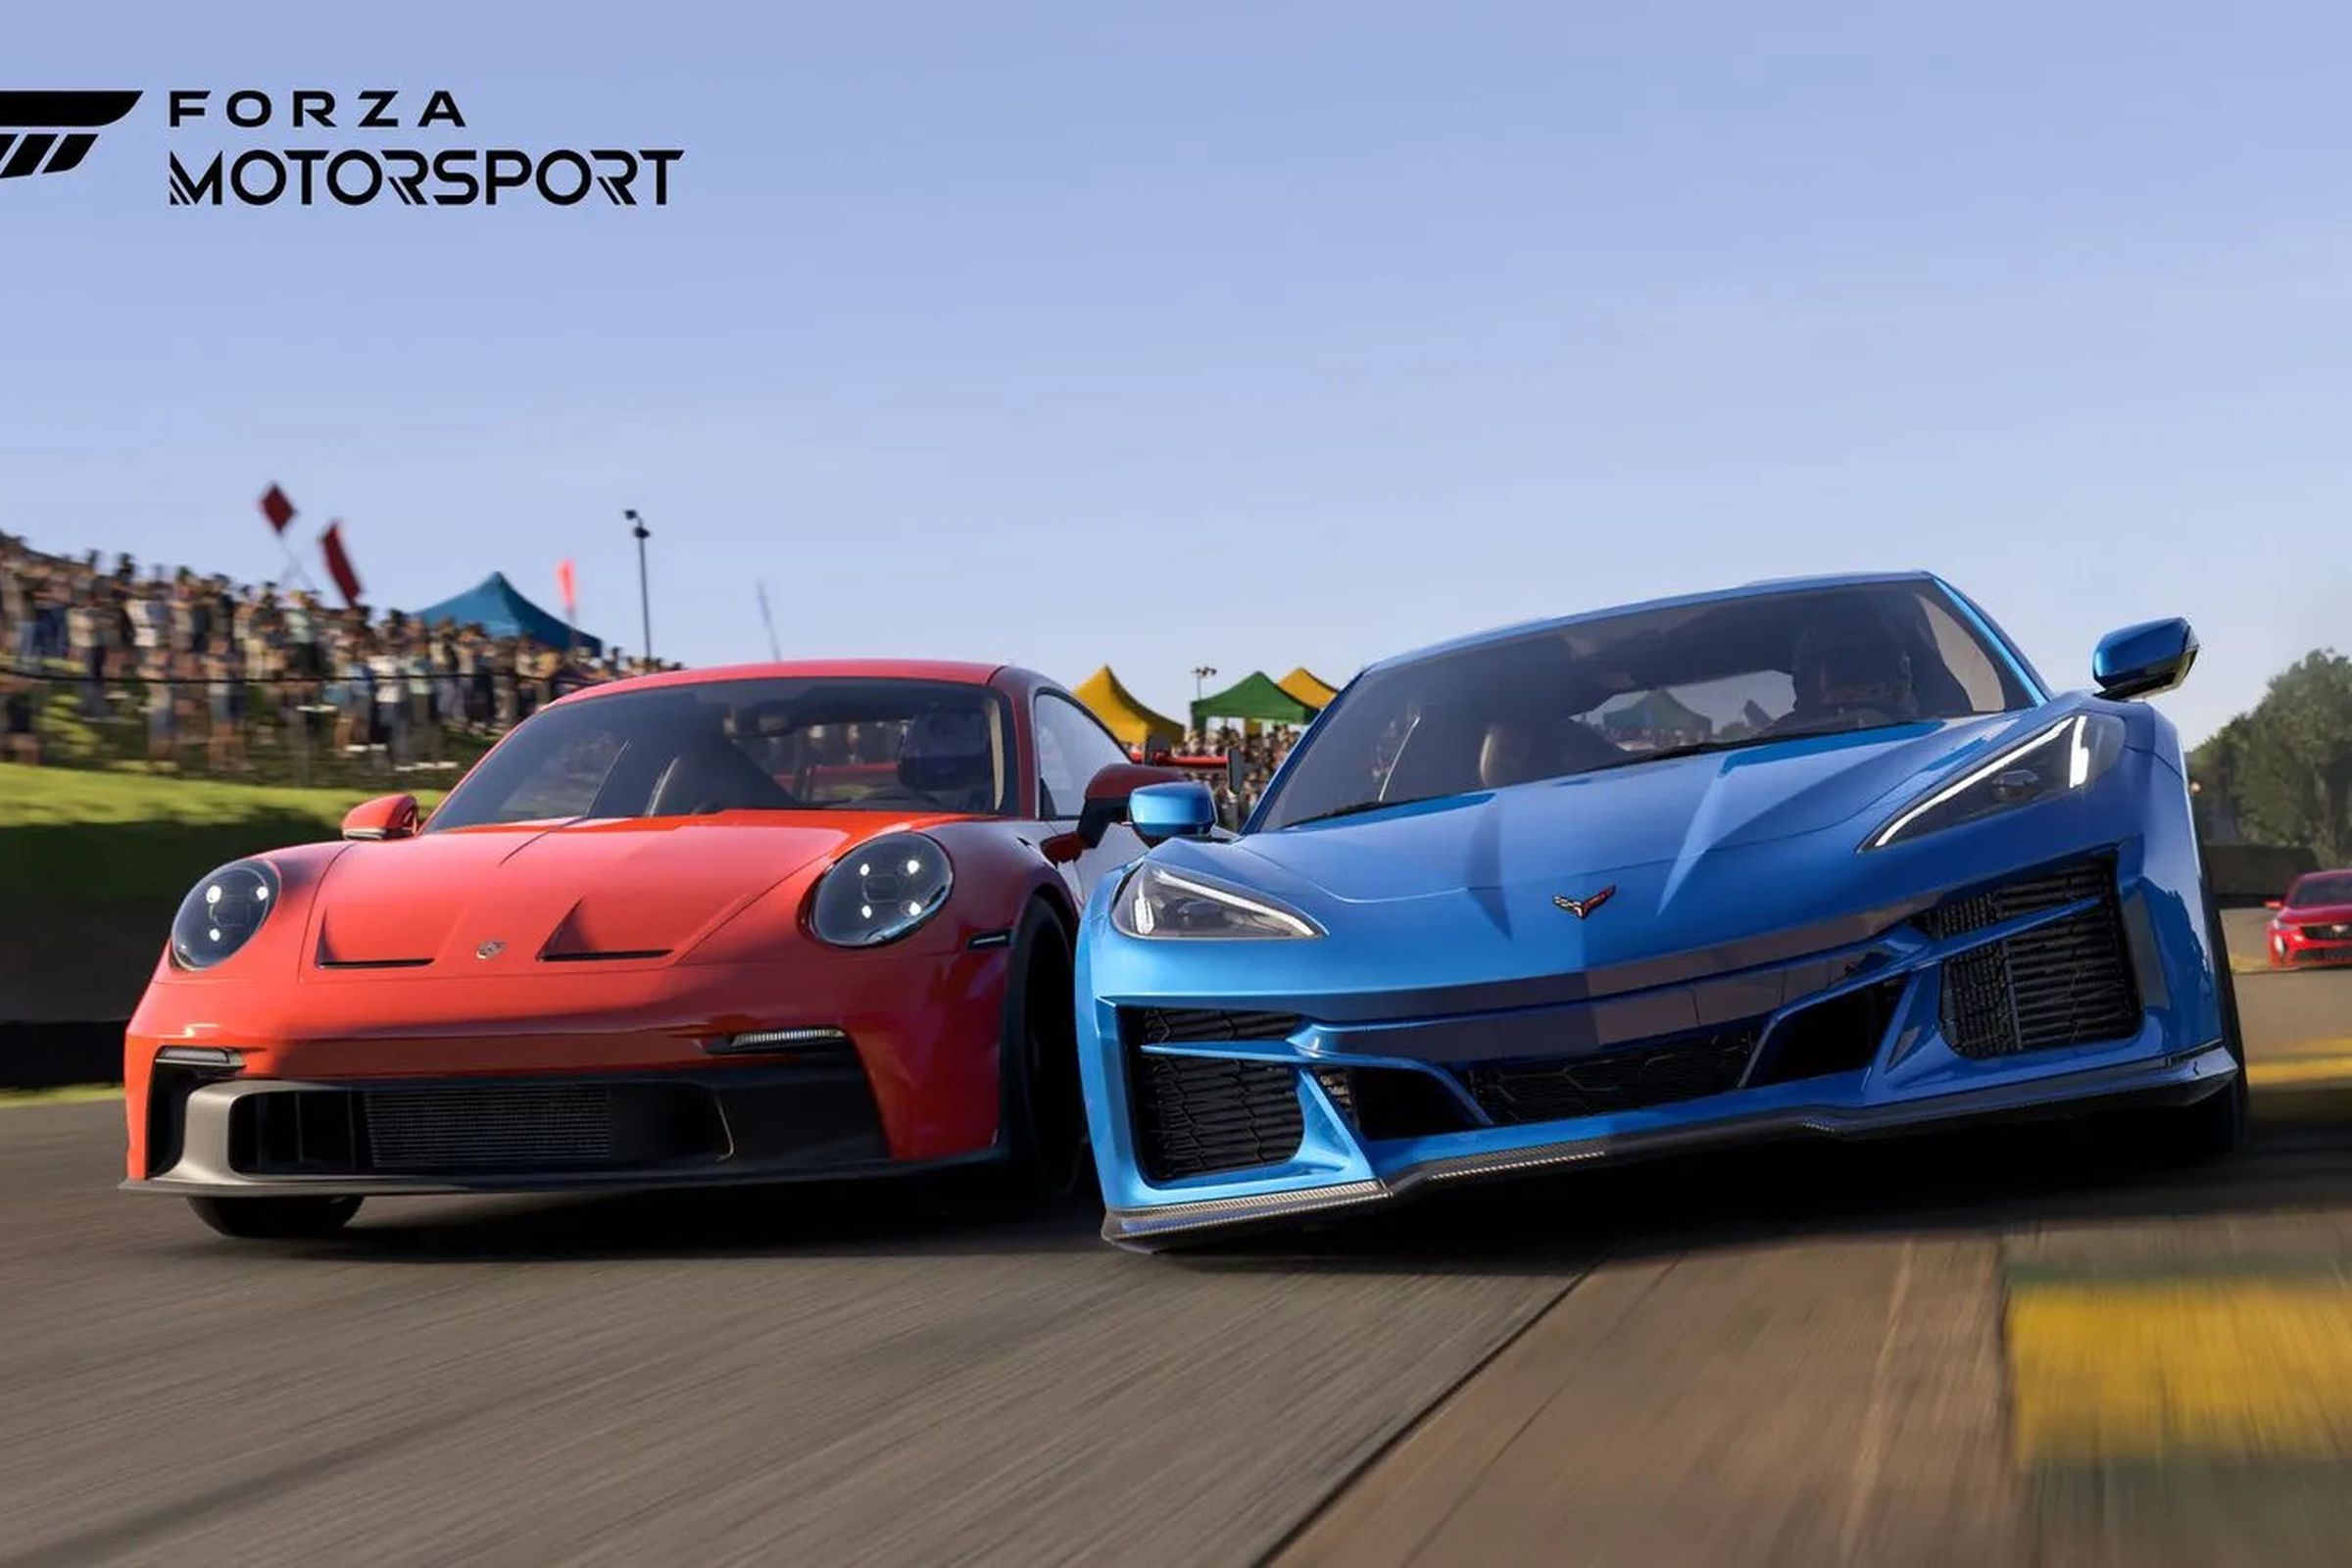 An image showing two cars on a racetrack in Forza Motorsport